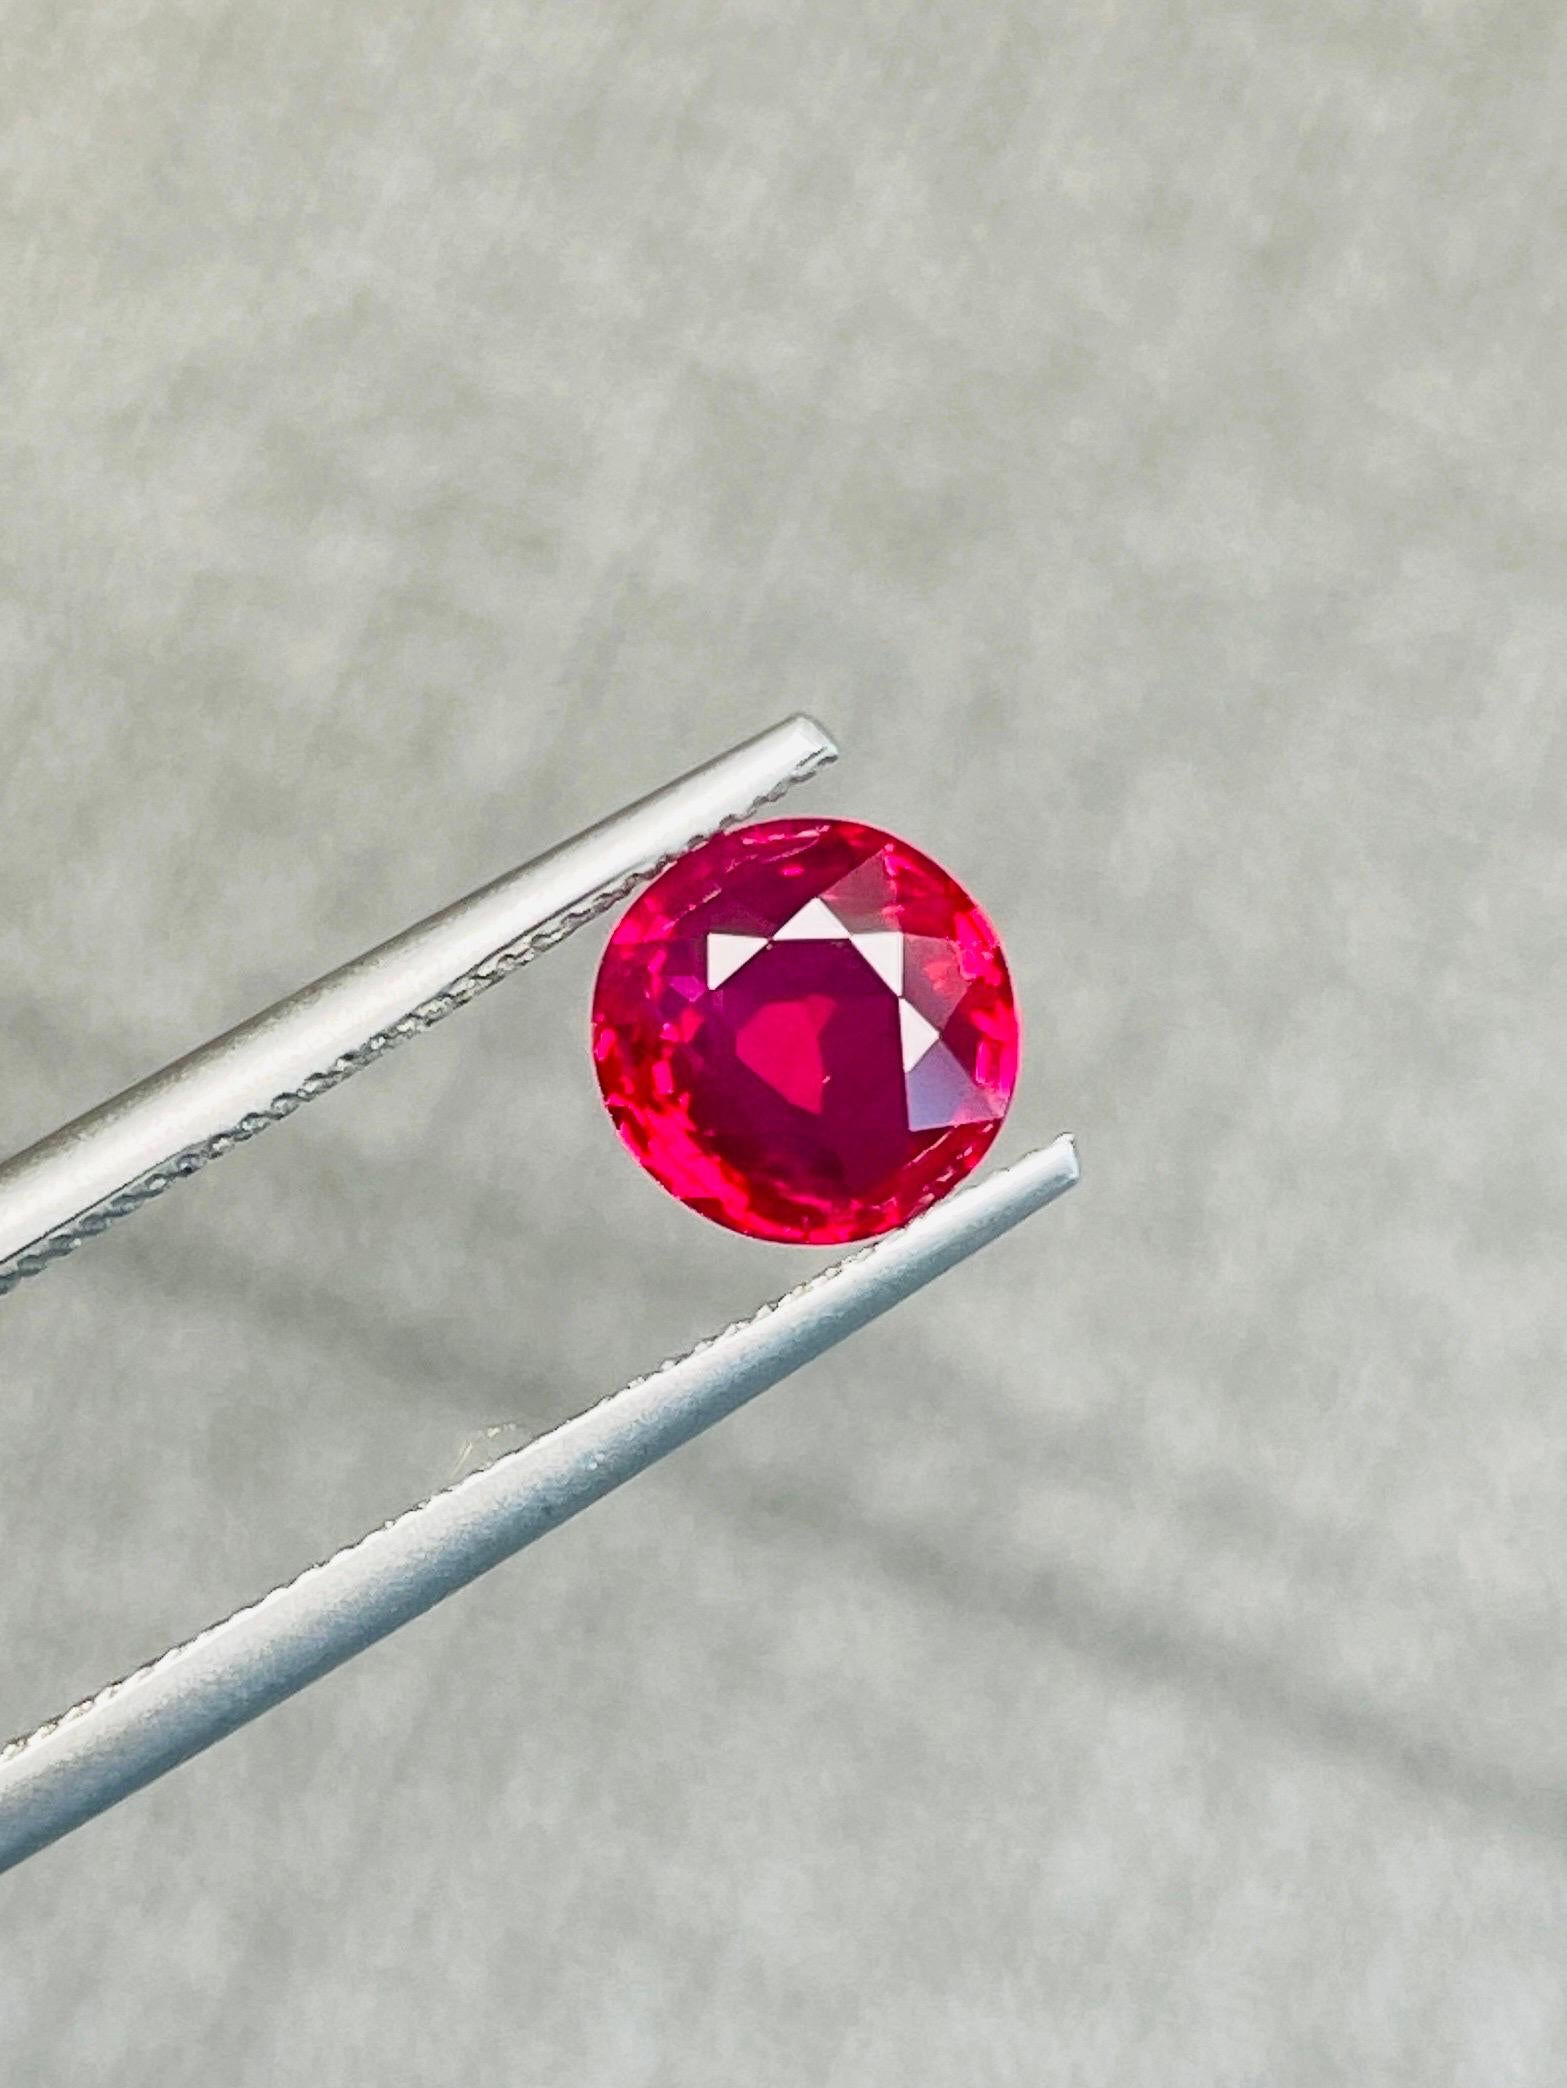 Perfect quality of burma ruby pigeon blood Unheated 1.08ct AIGS certified  2